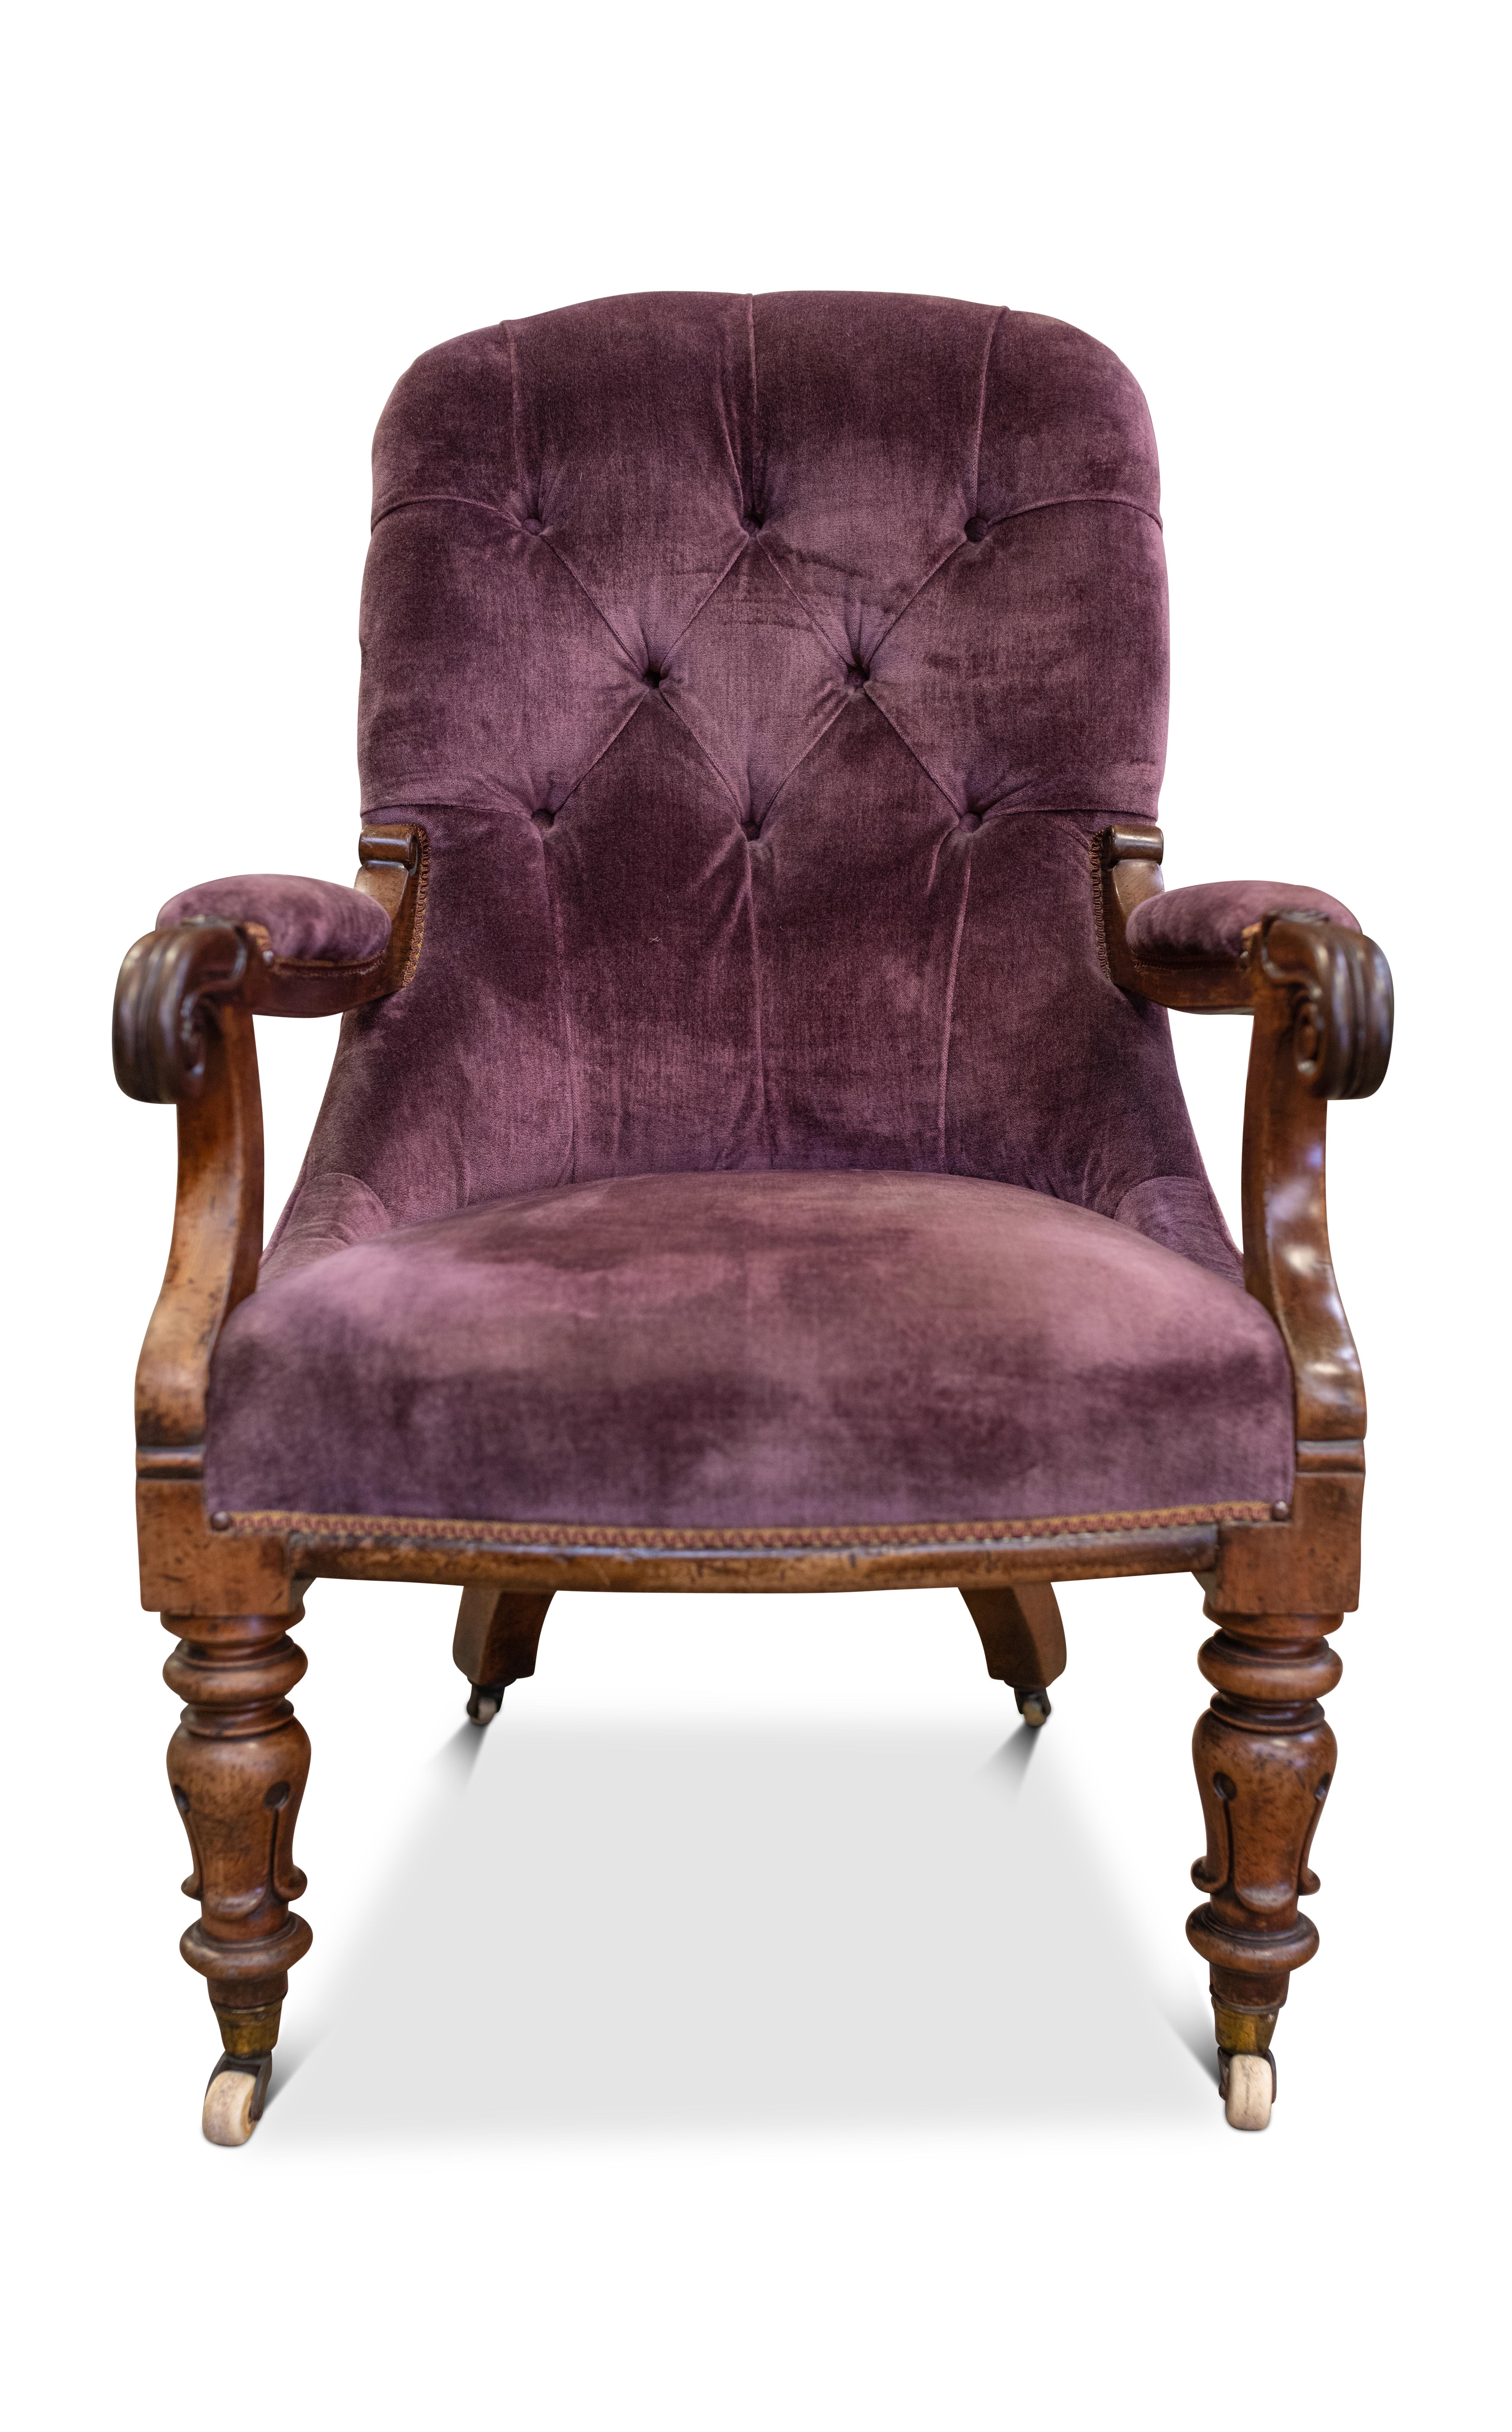 William IV Scroll Arm Button Back Library Armchair With Purple Velvet Button Back Upholstery upon Porcelain & Brass Castors

Extra dimensions
Depth of seat 50cm
Width of seat 51cm
Height to arms 63cm
